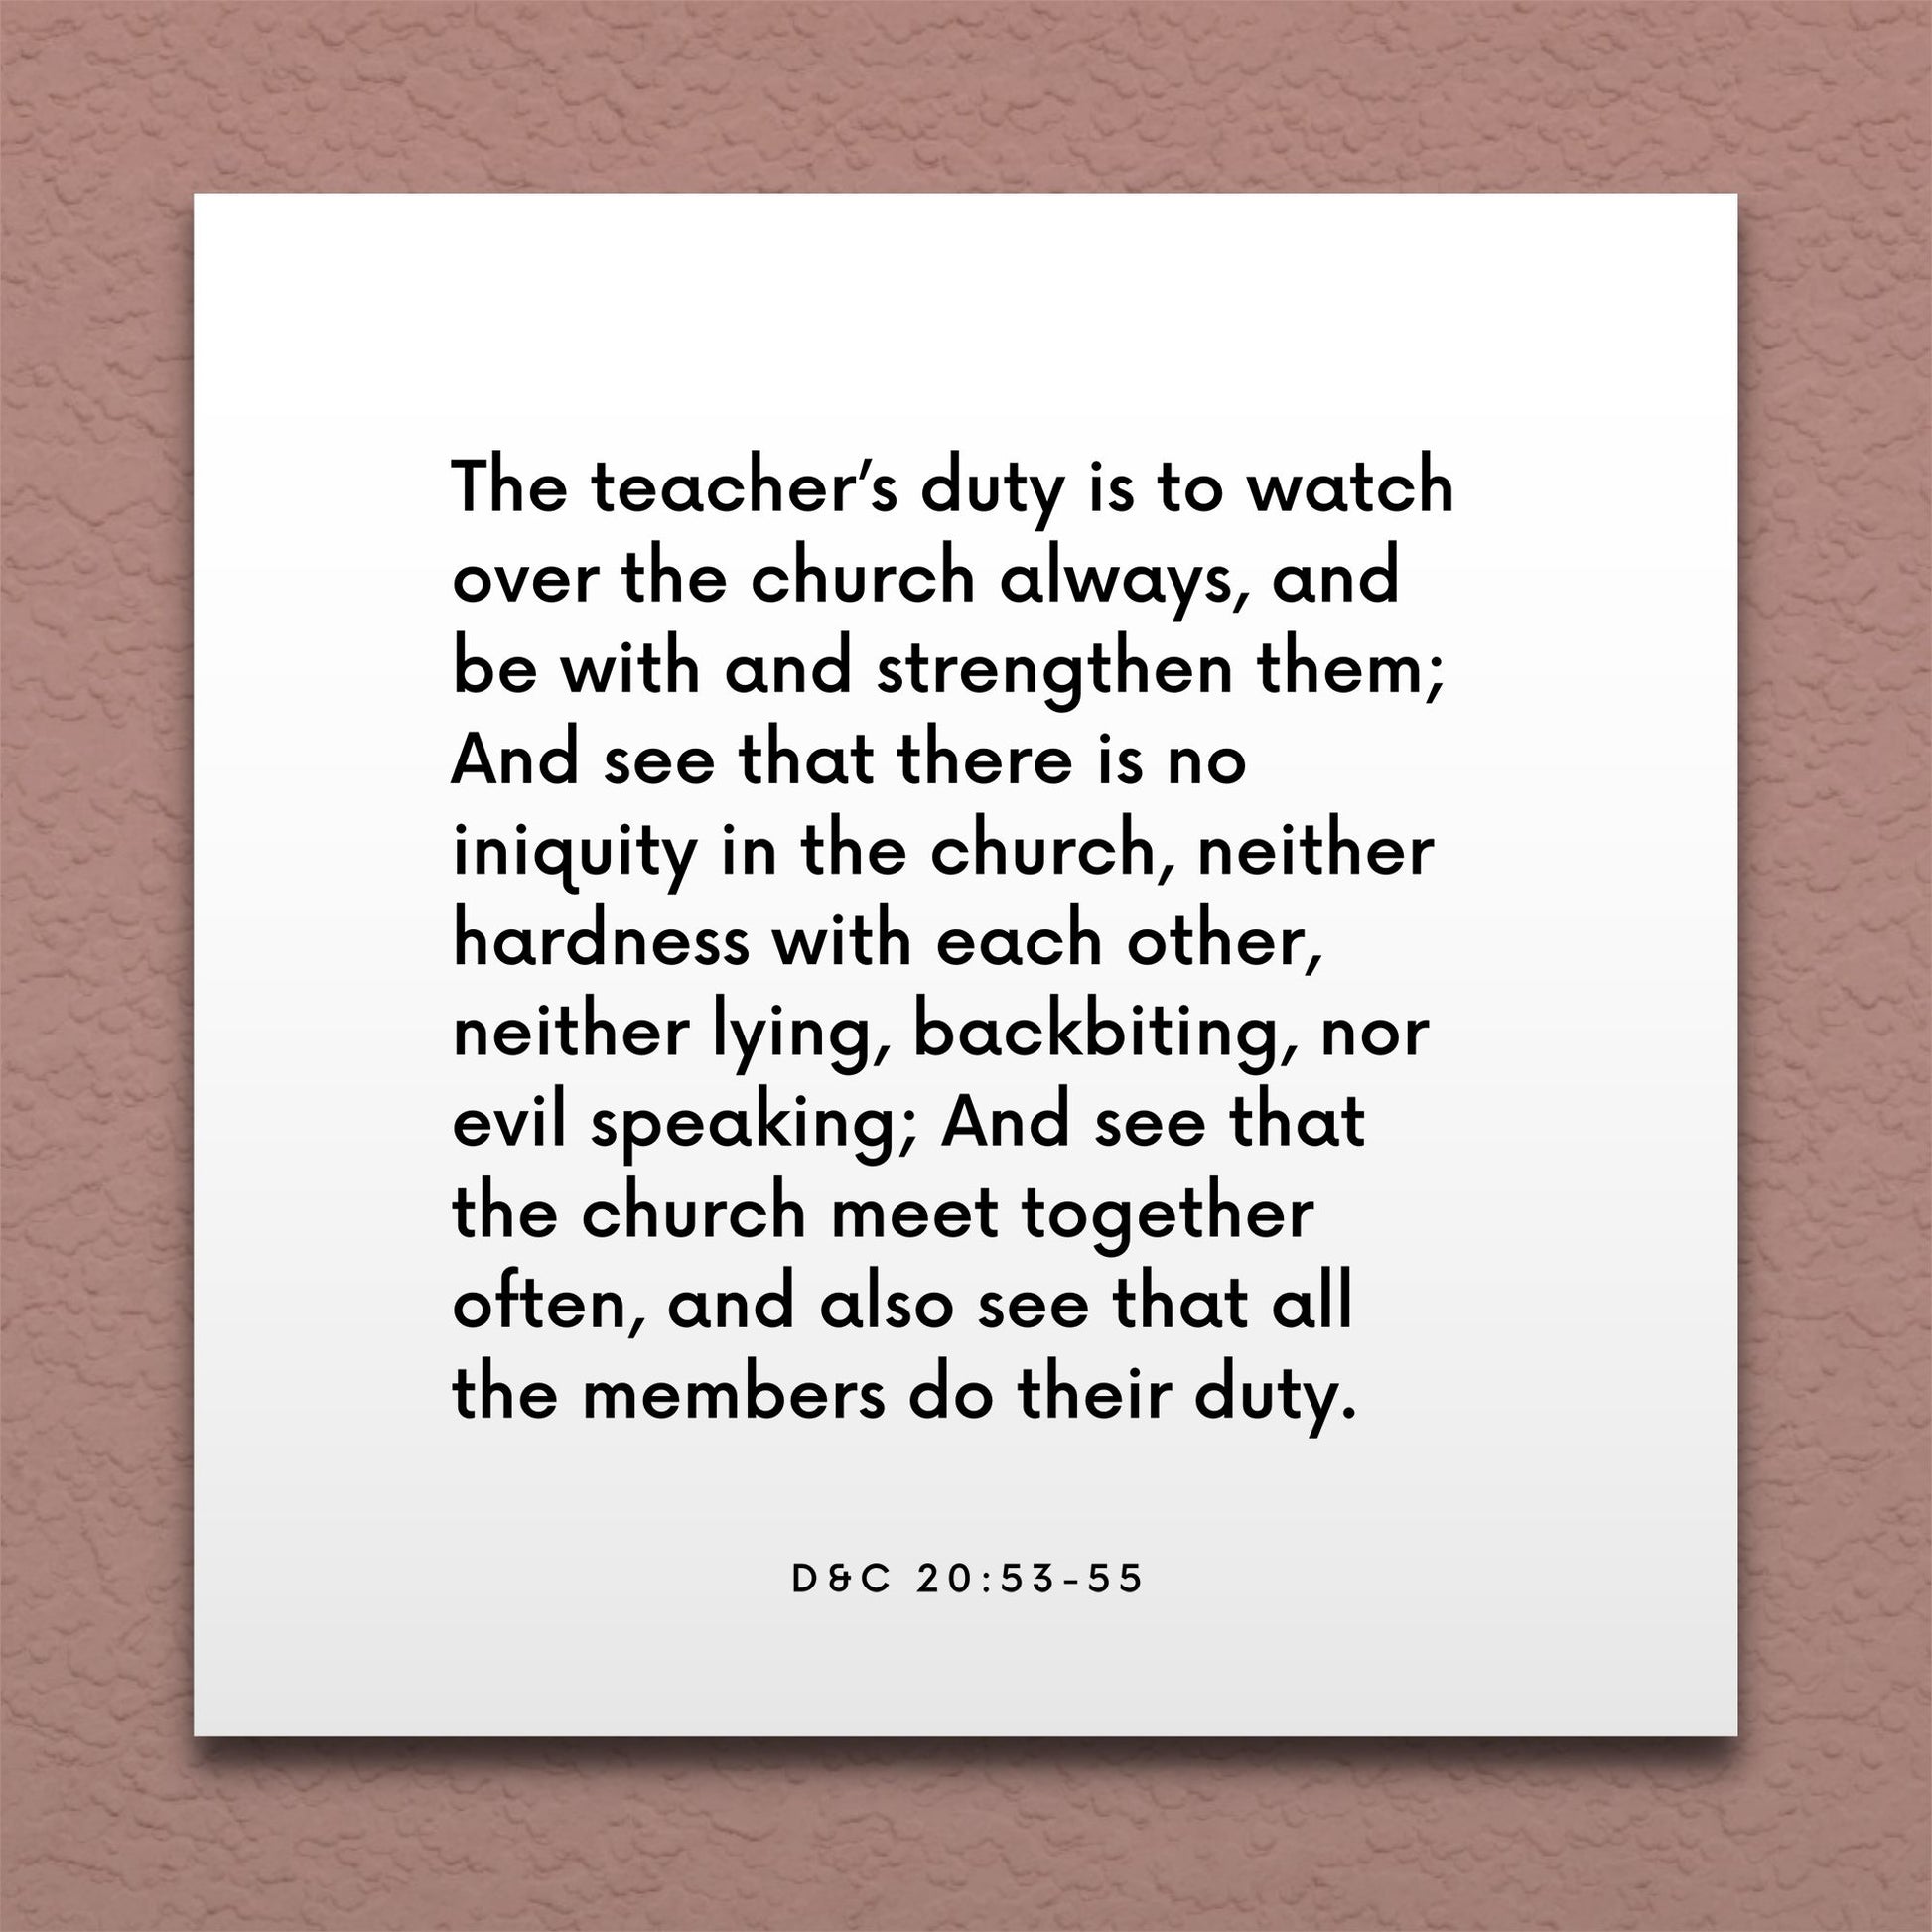 Wall-mounted scripture tile for D&C 20:53-55 - "The duties of a Teacher or Deacon"